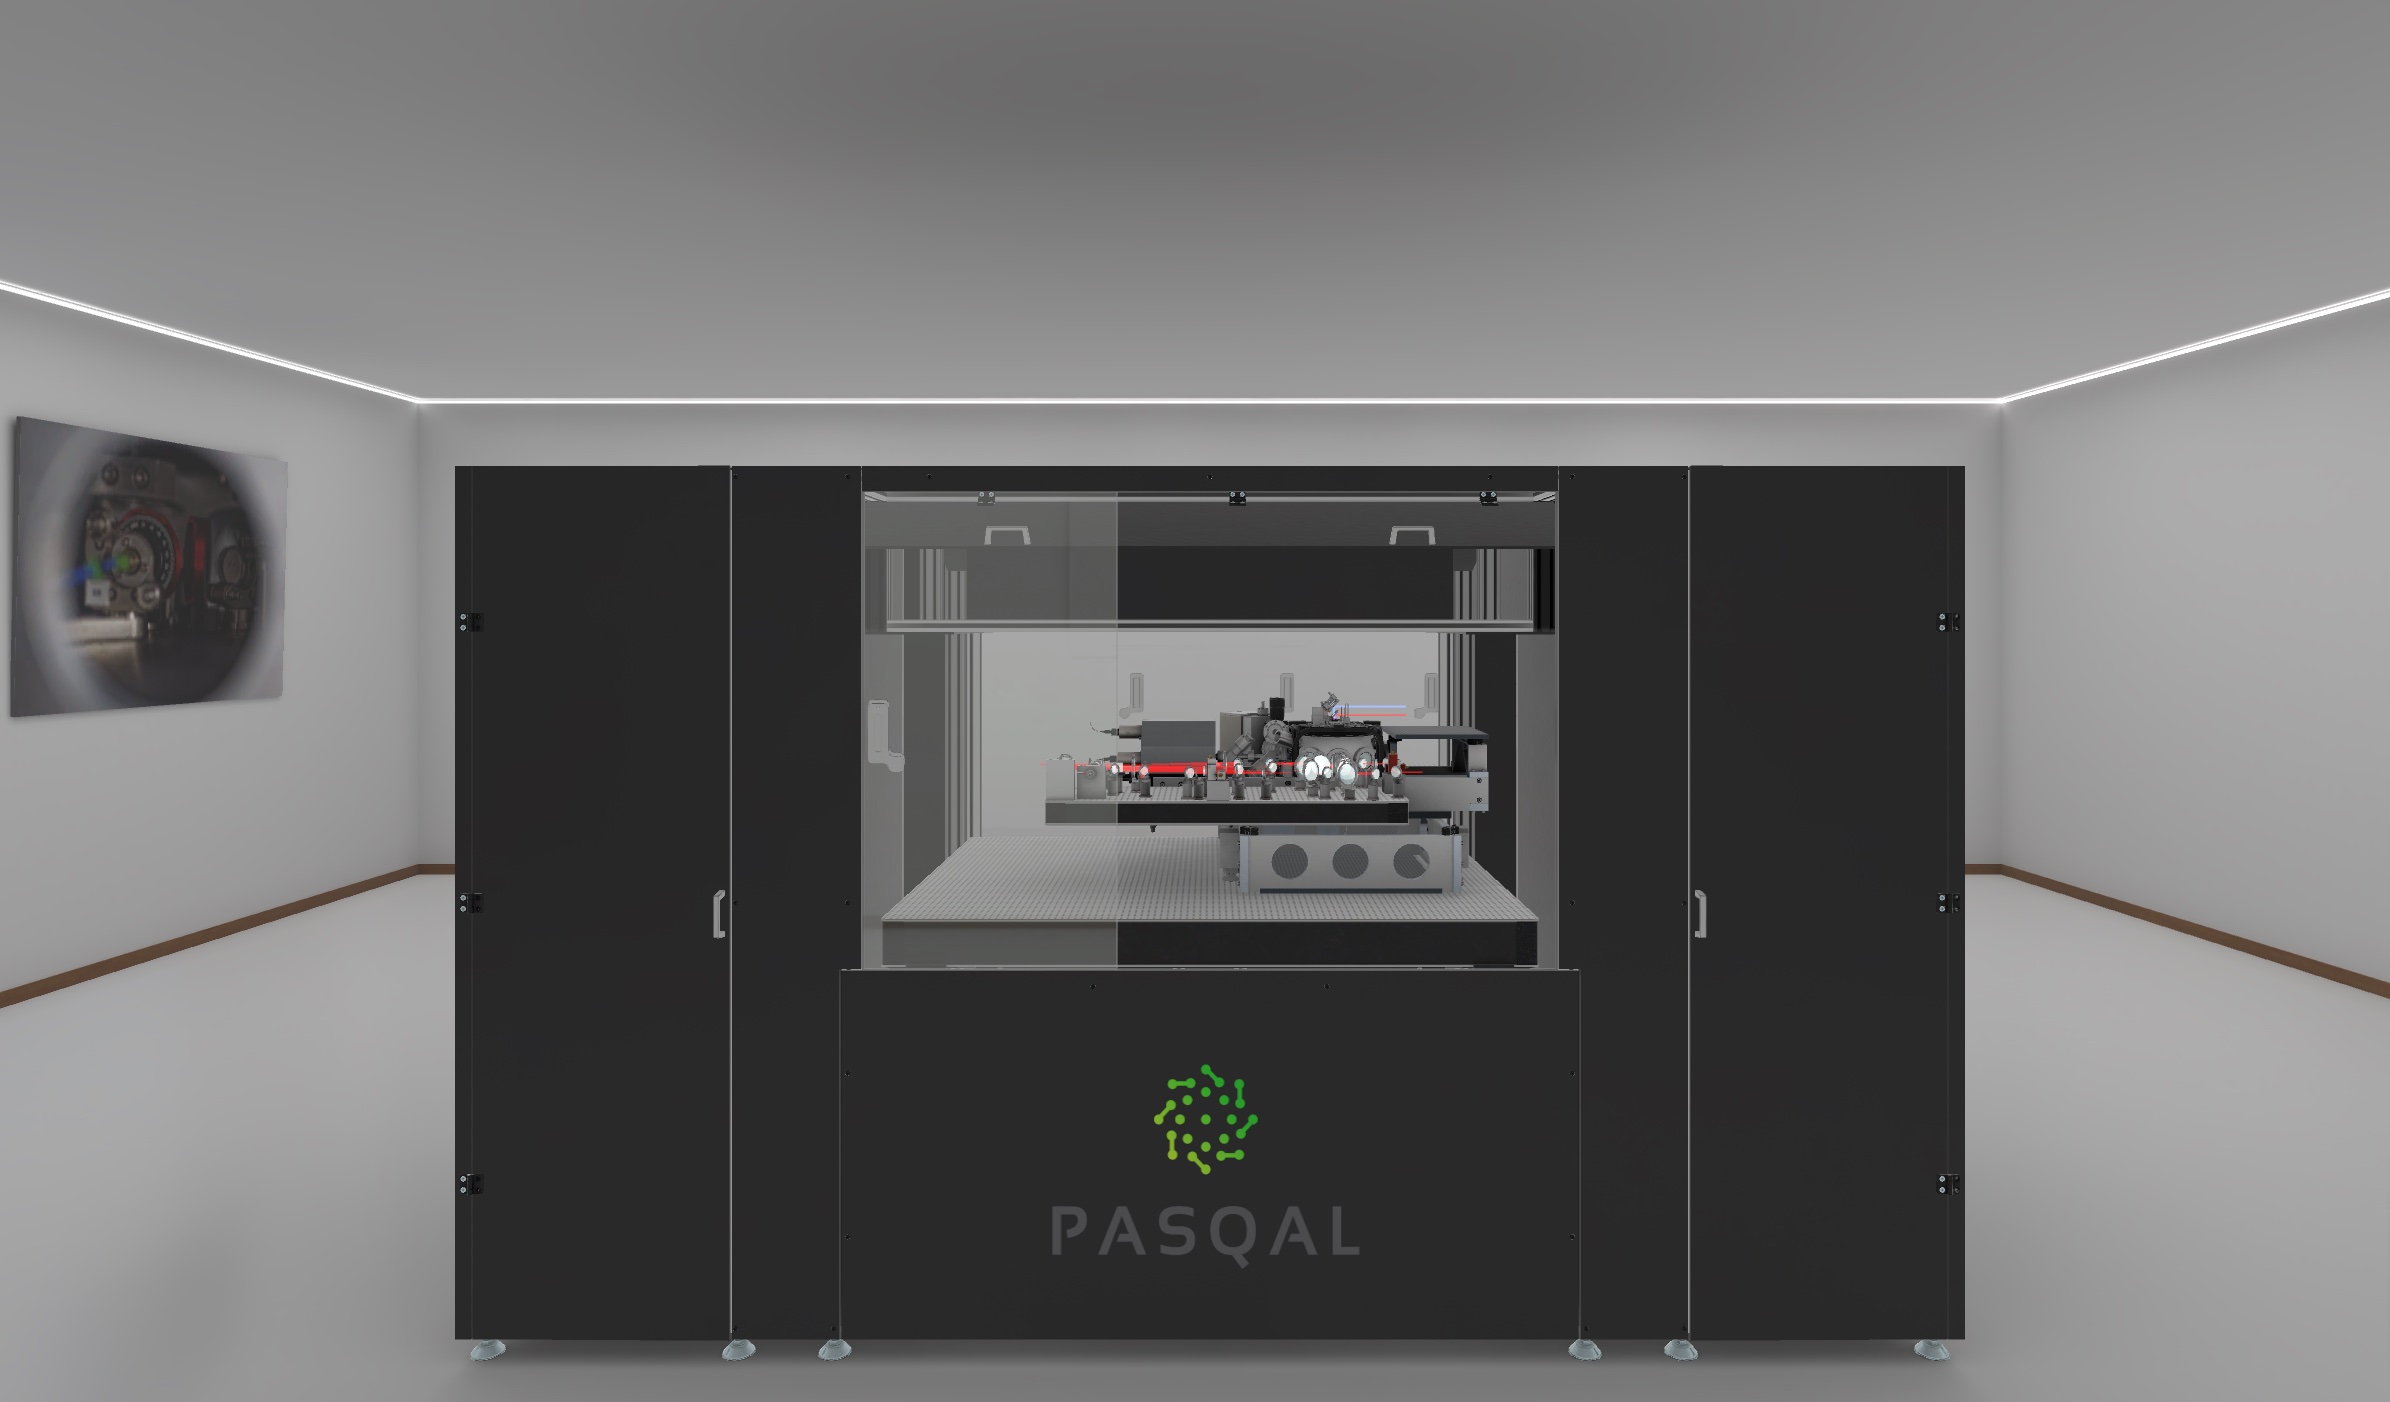 French Quantum Start-Up Company Pasqal Gets Massive Funding Securing €100 Million In Series B Funding.